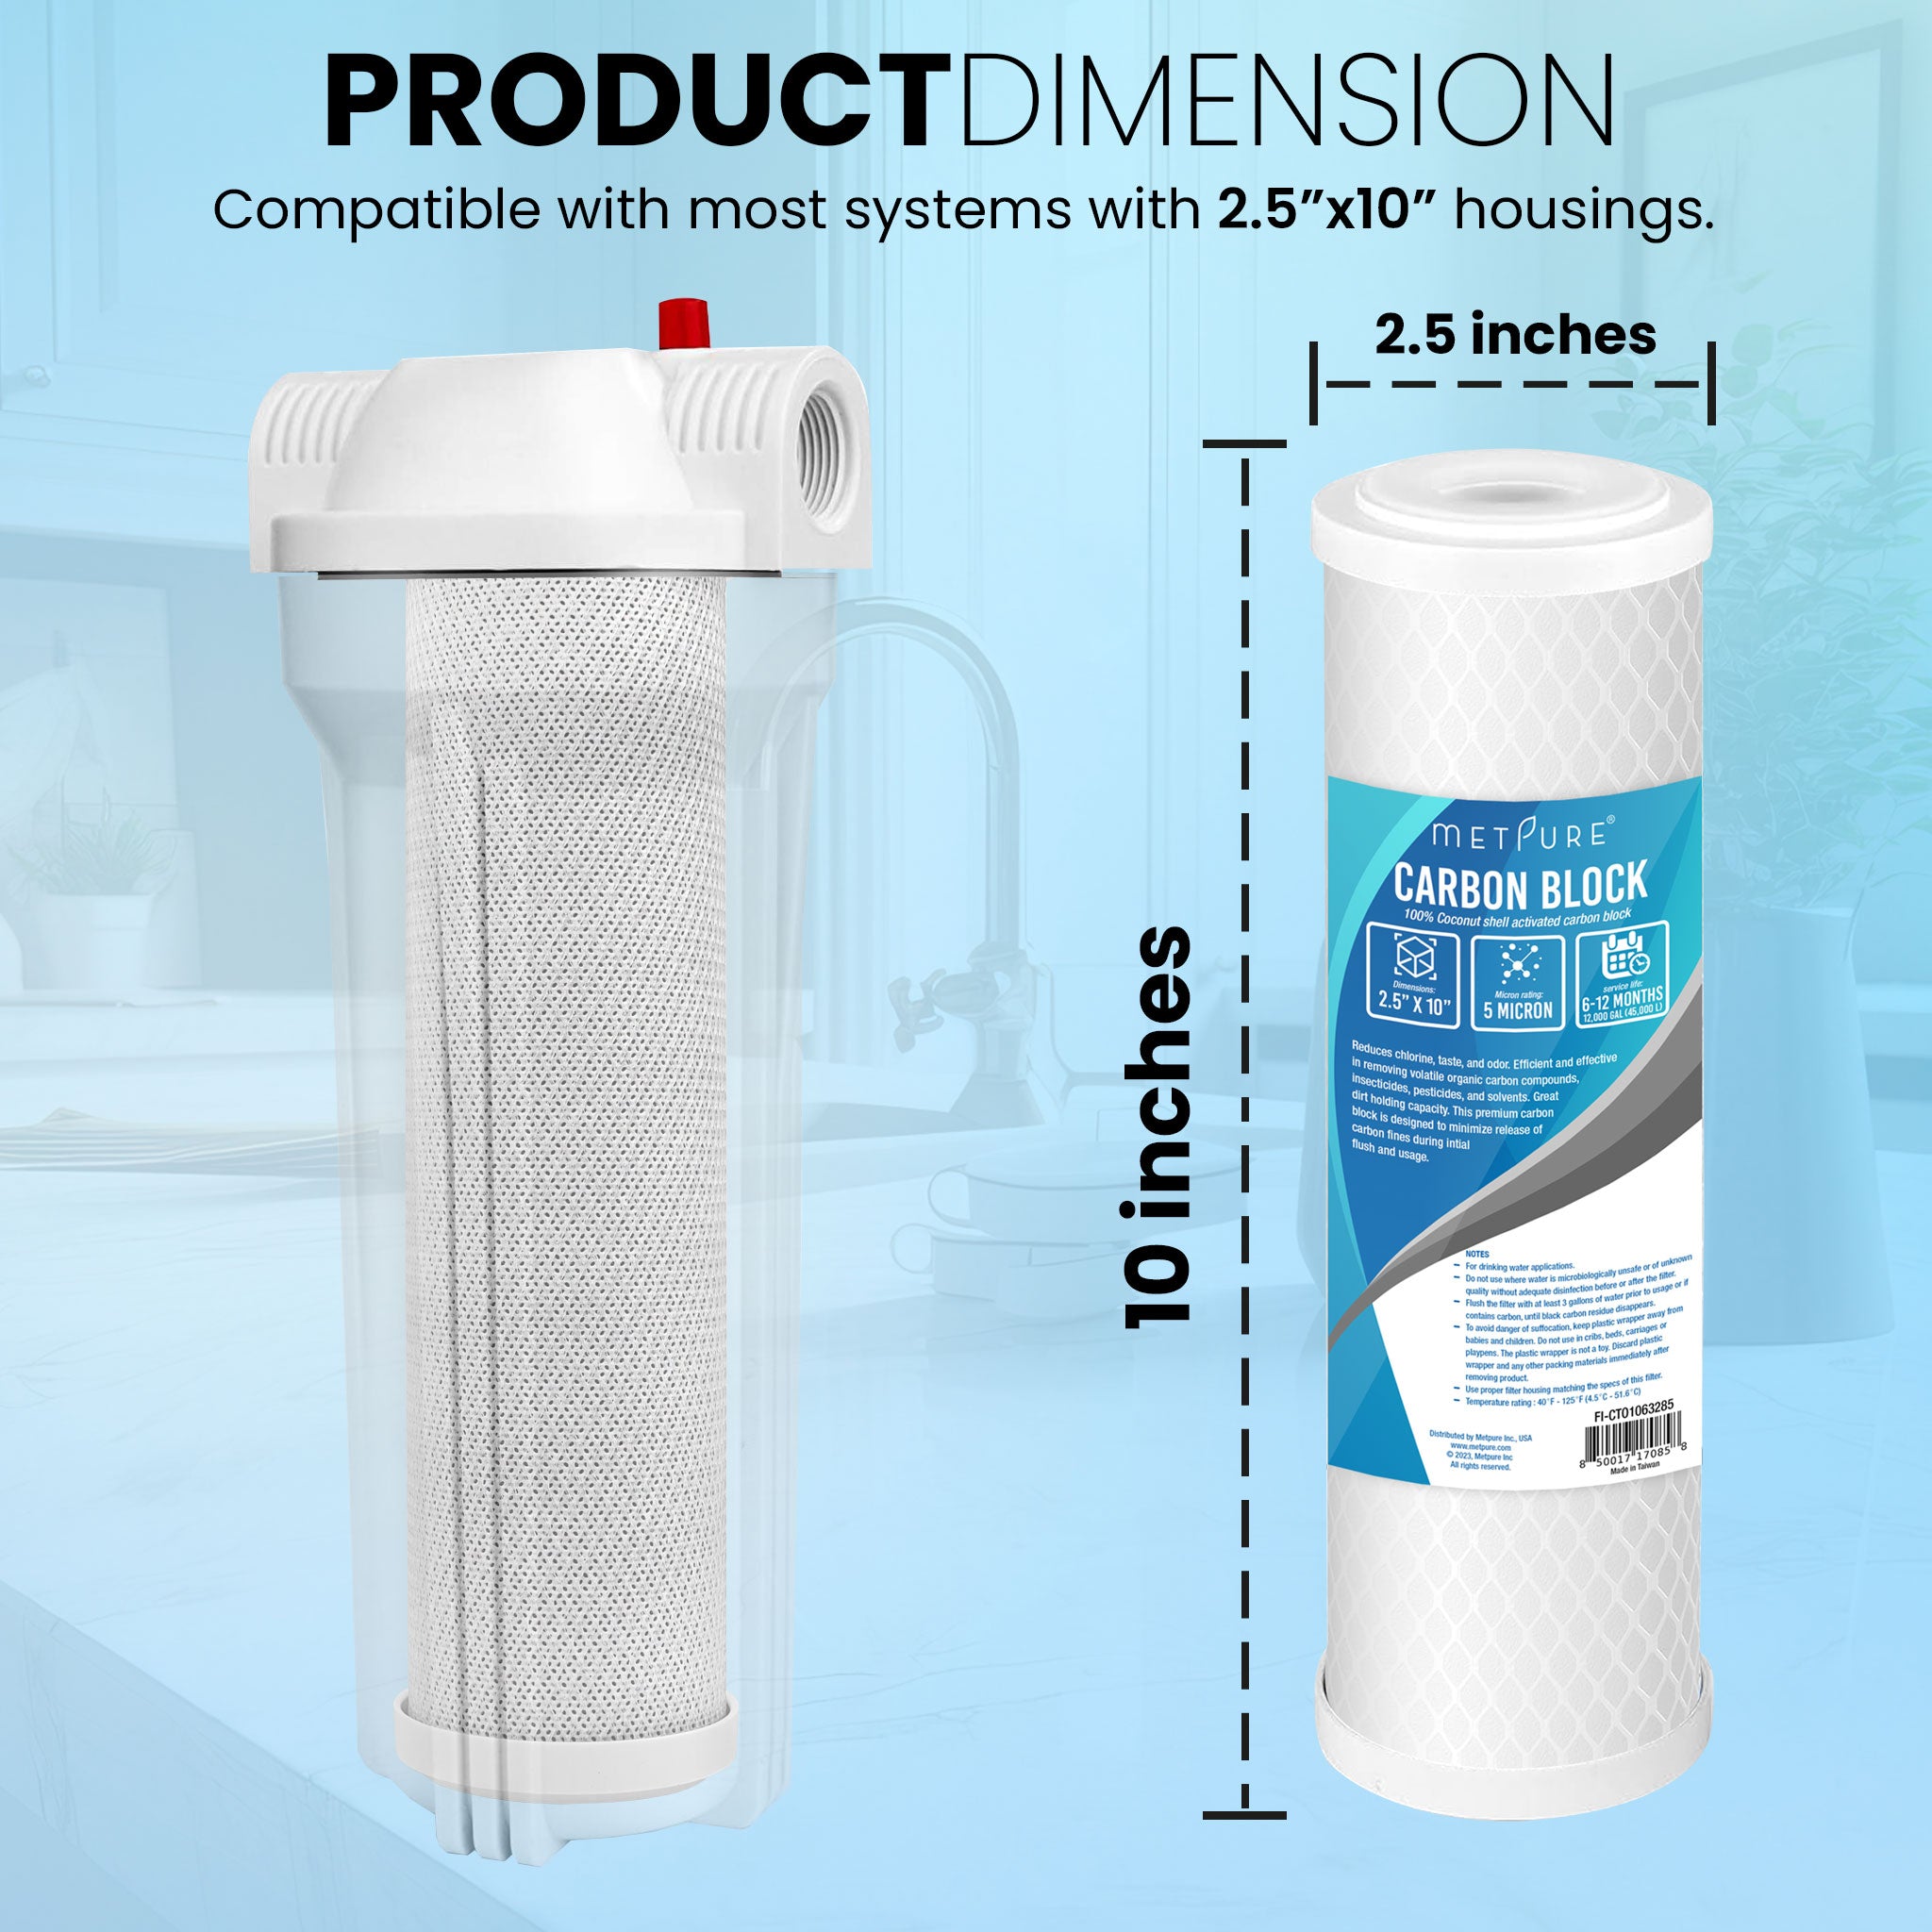 Metpure 10” x 2.5” Carbon Block Water Filter Cartridge Replacement - 5 Micron Coconut Shell Carbon Block CTO 10-inch. Universal, Compatible with Dupont, Hydronix, Whirlpool, and more.